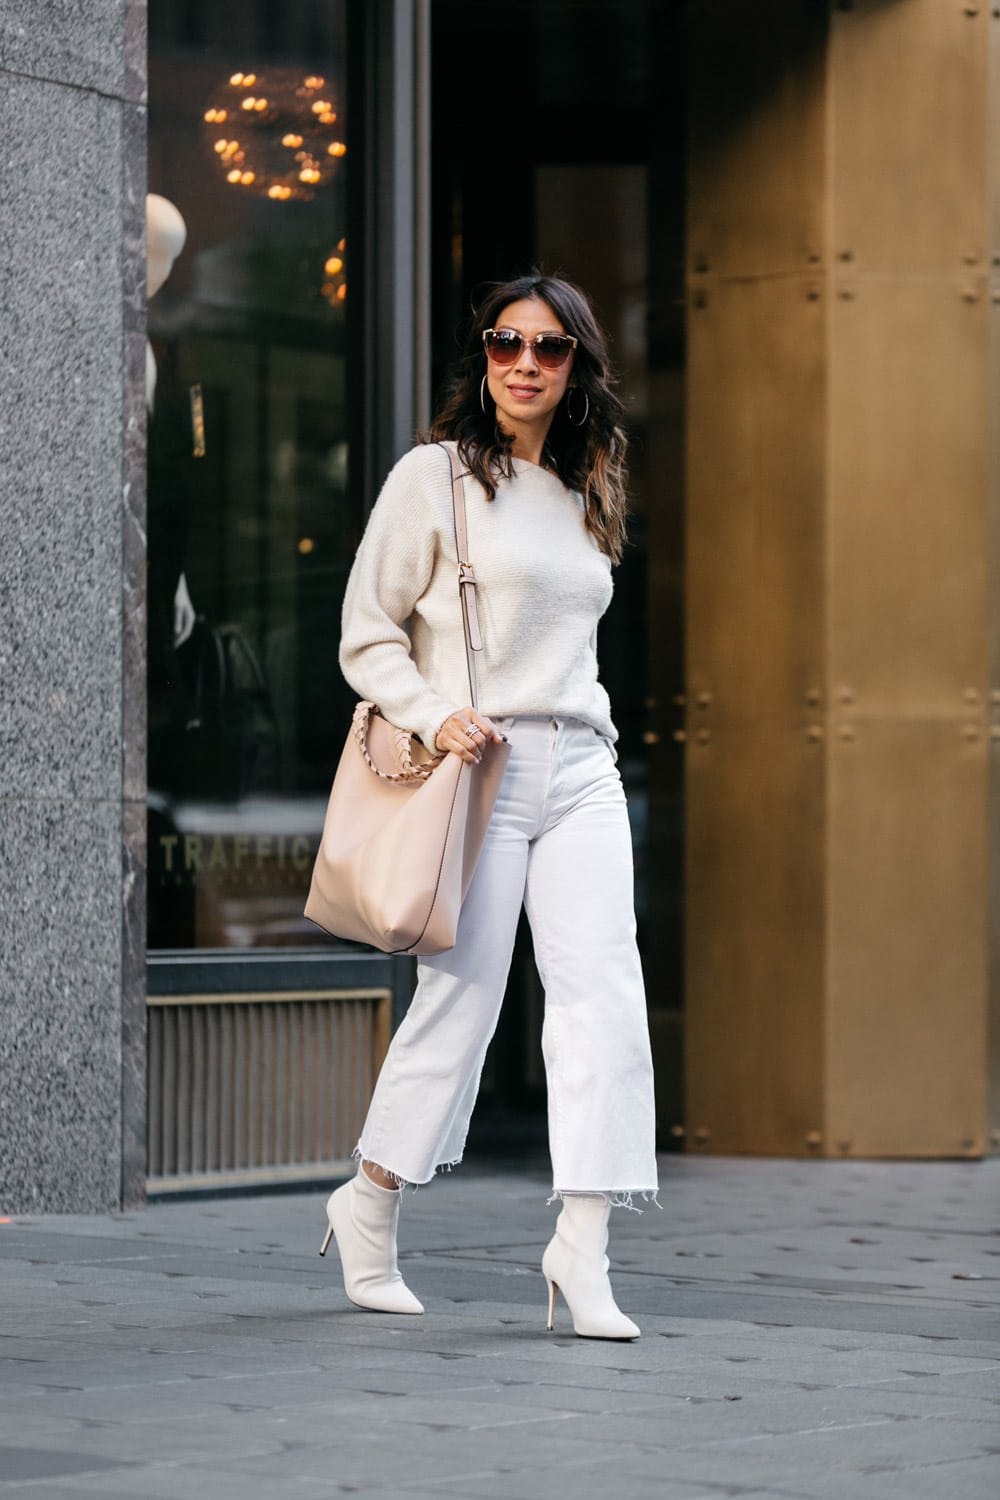 style of sam in winter white outfit reformation cropped jeans rachel zoe winter box of style